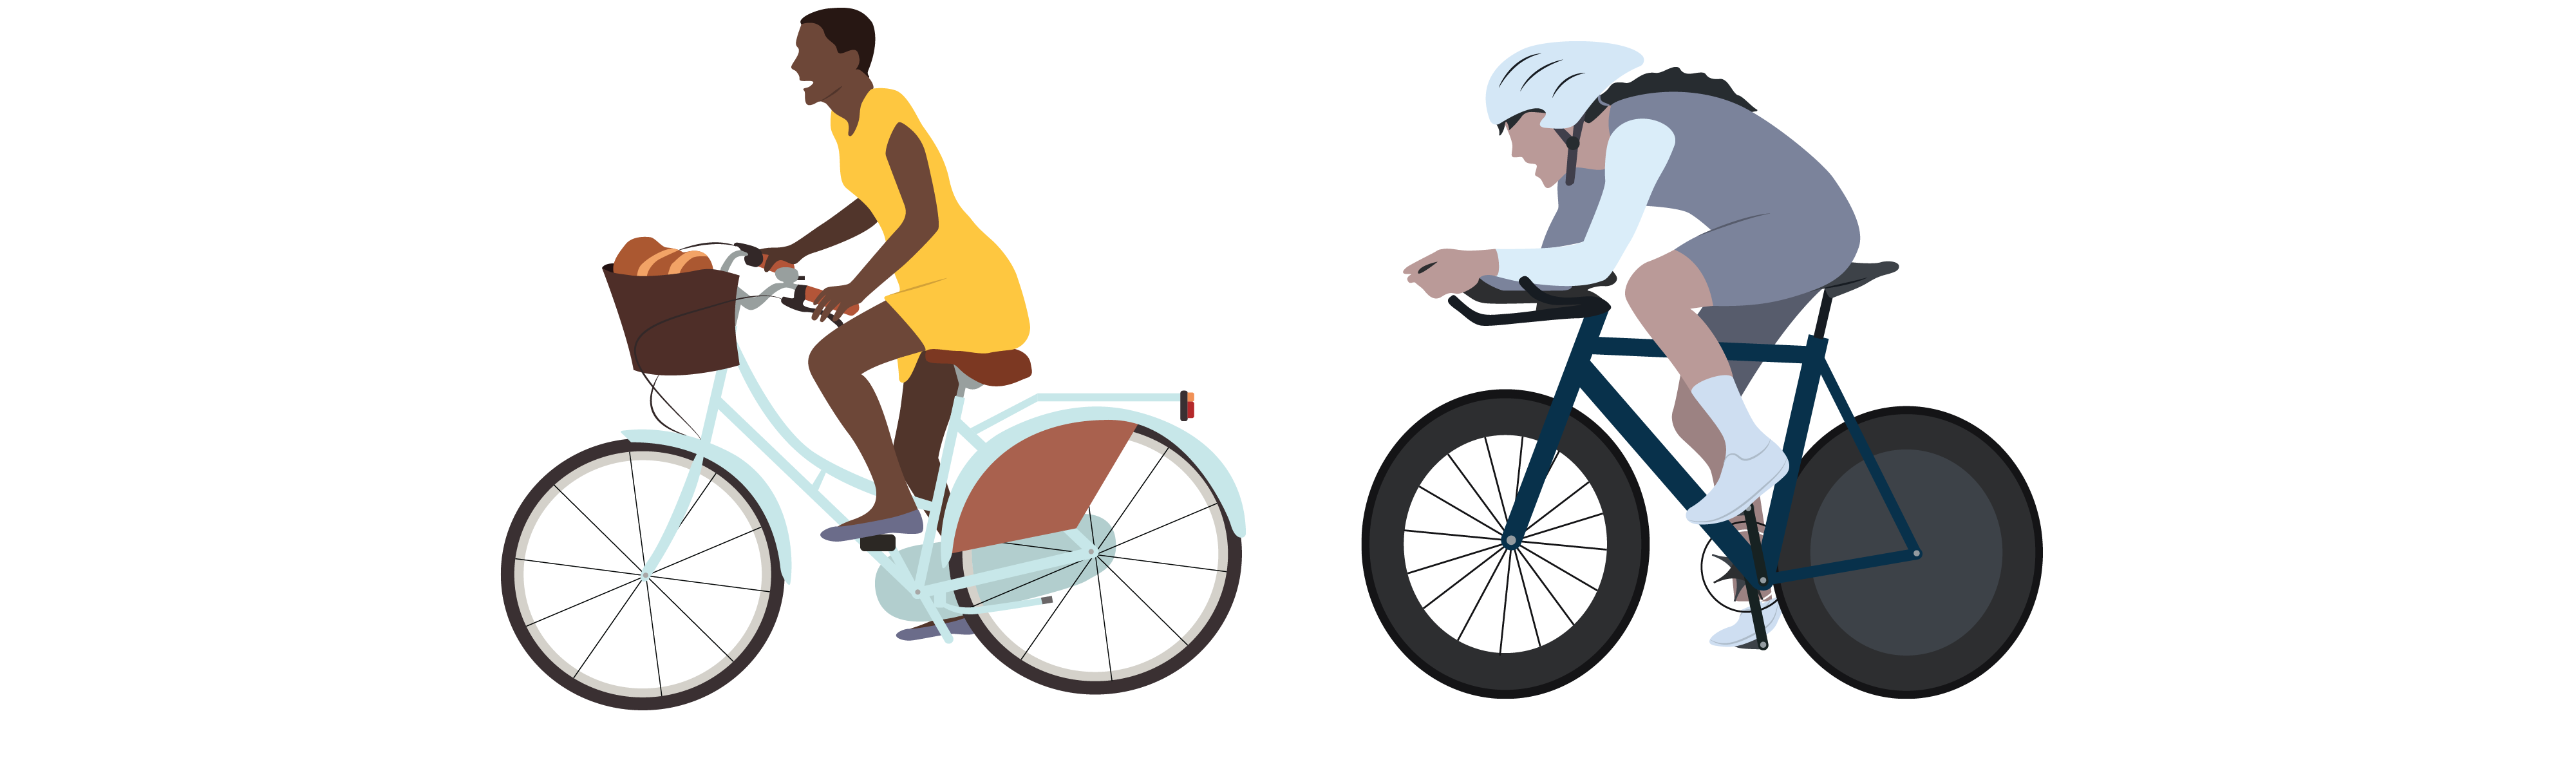 On the left, a person with a yellow dress and short, dark brown hair leisurely rides a light teal cruiser bicycle. The bicycle has a brown basket on the front with a loaf of bread sitting in it. On the right, a person with long hair dressed in grey athletic clothing and a helmet rides a dark blue road bike, bent over the handlebars.